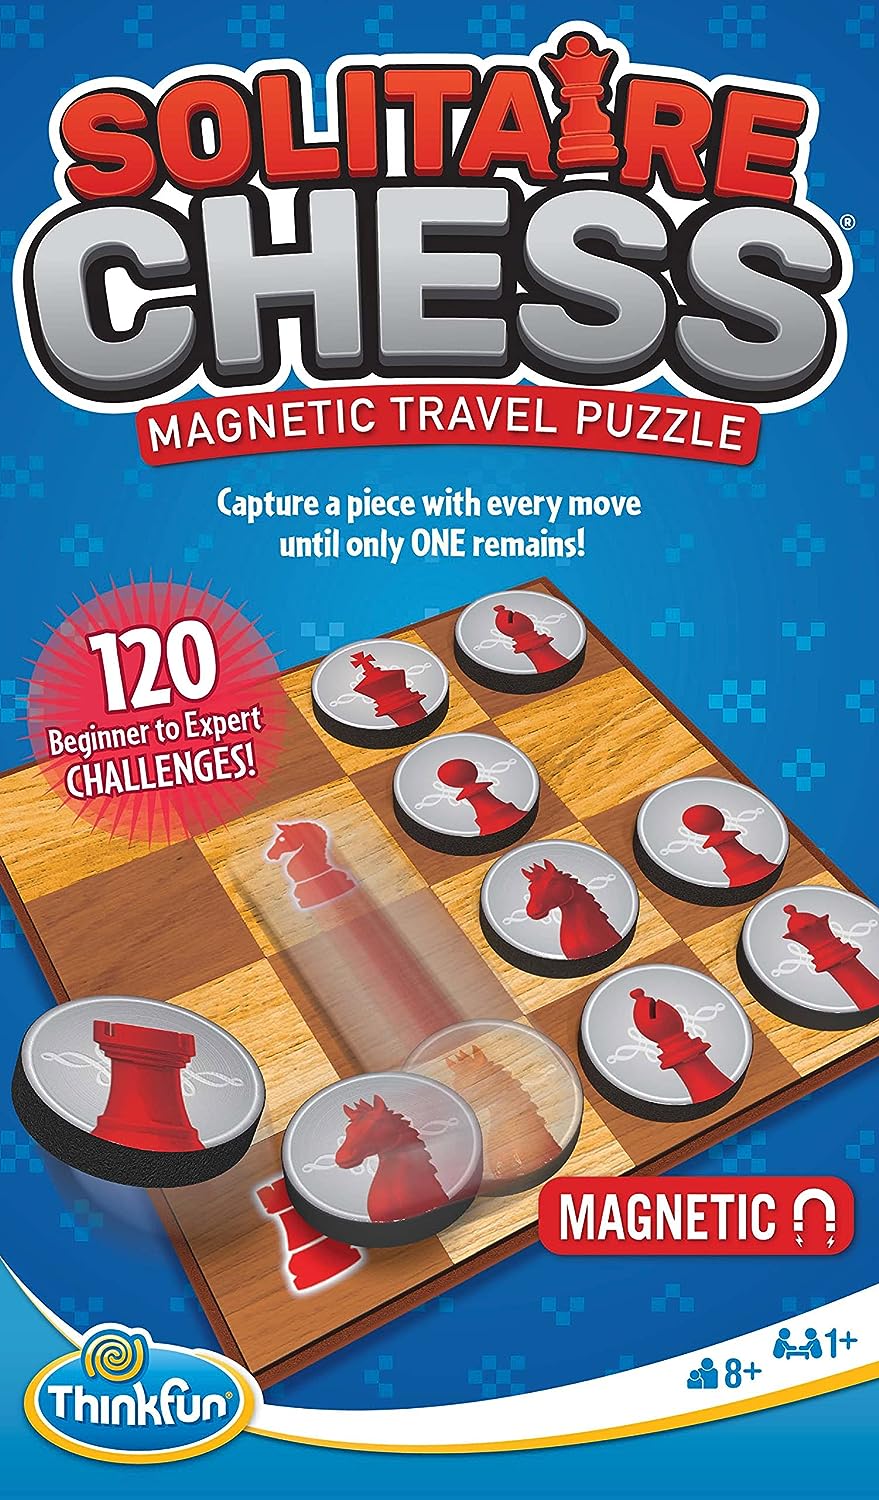 Solitaire Chess Magnetic Travel Puzzle 